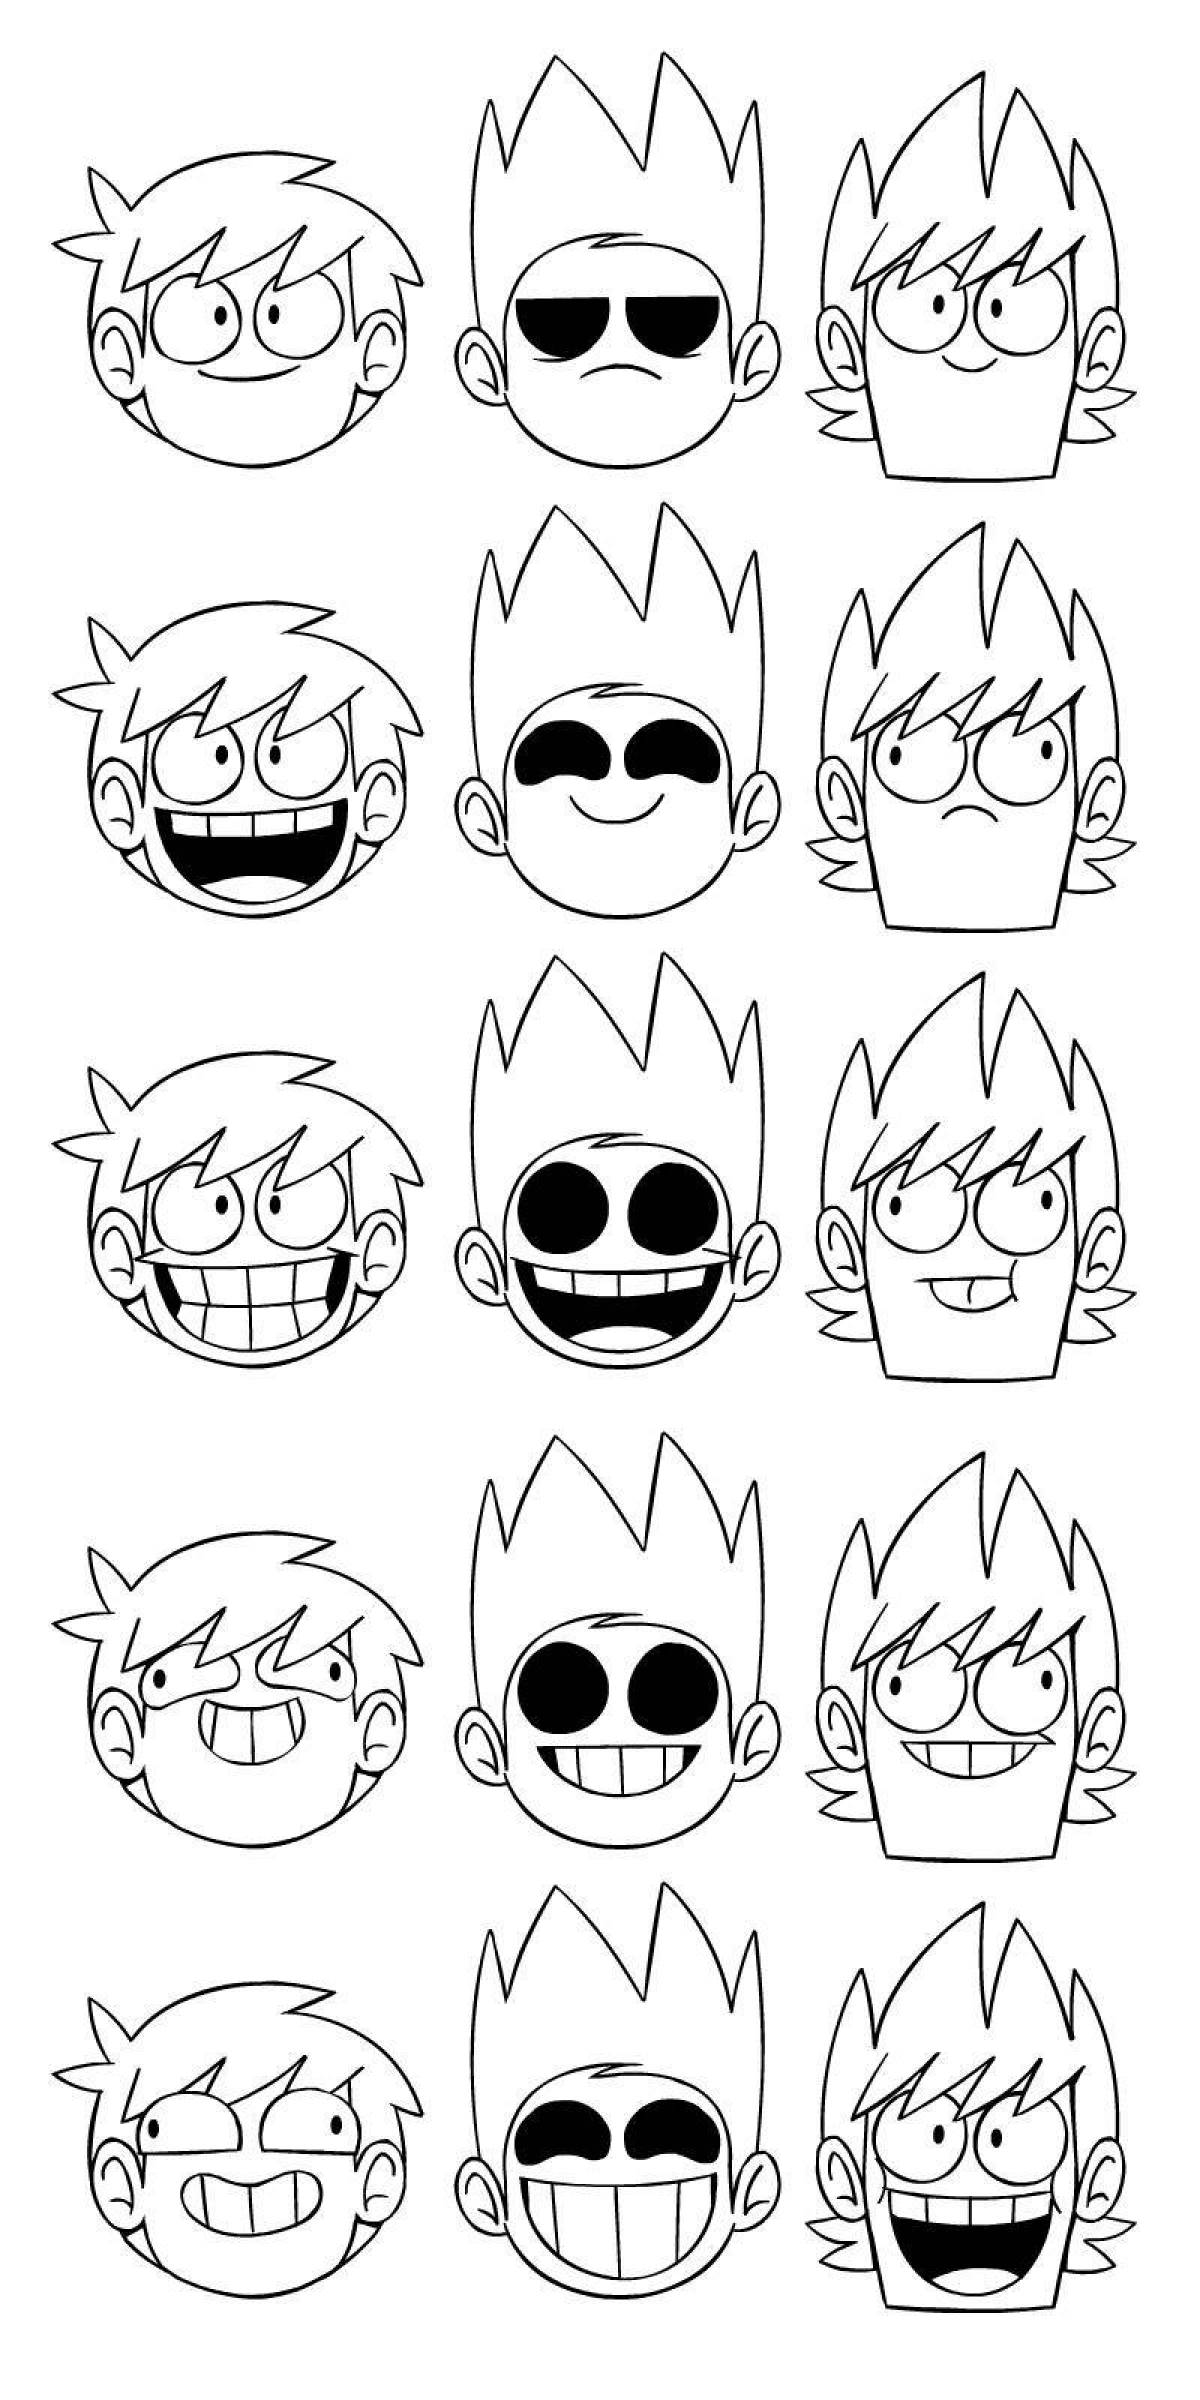 Great eddsworld coloring book